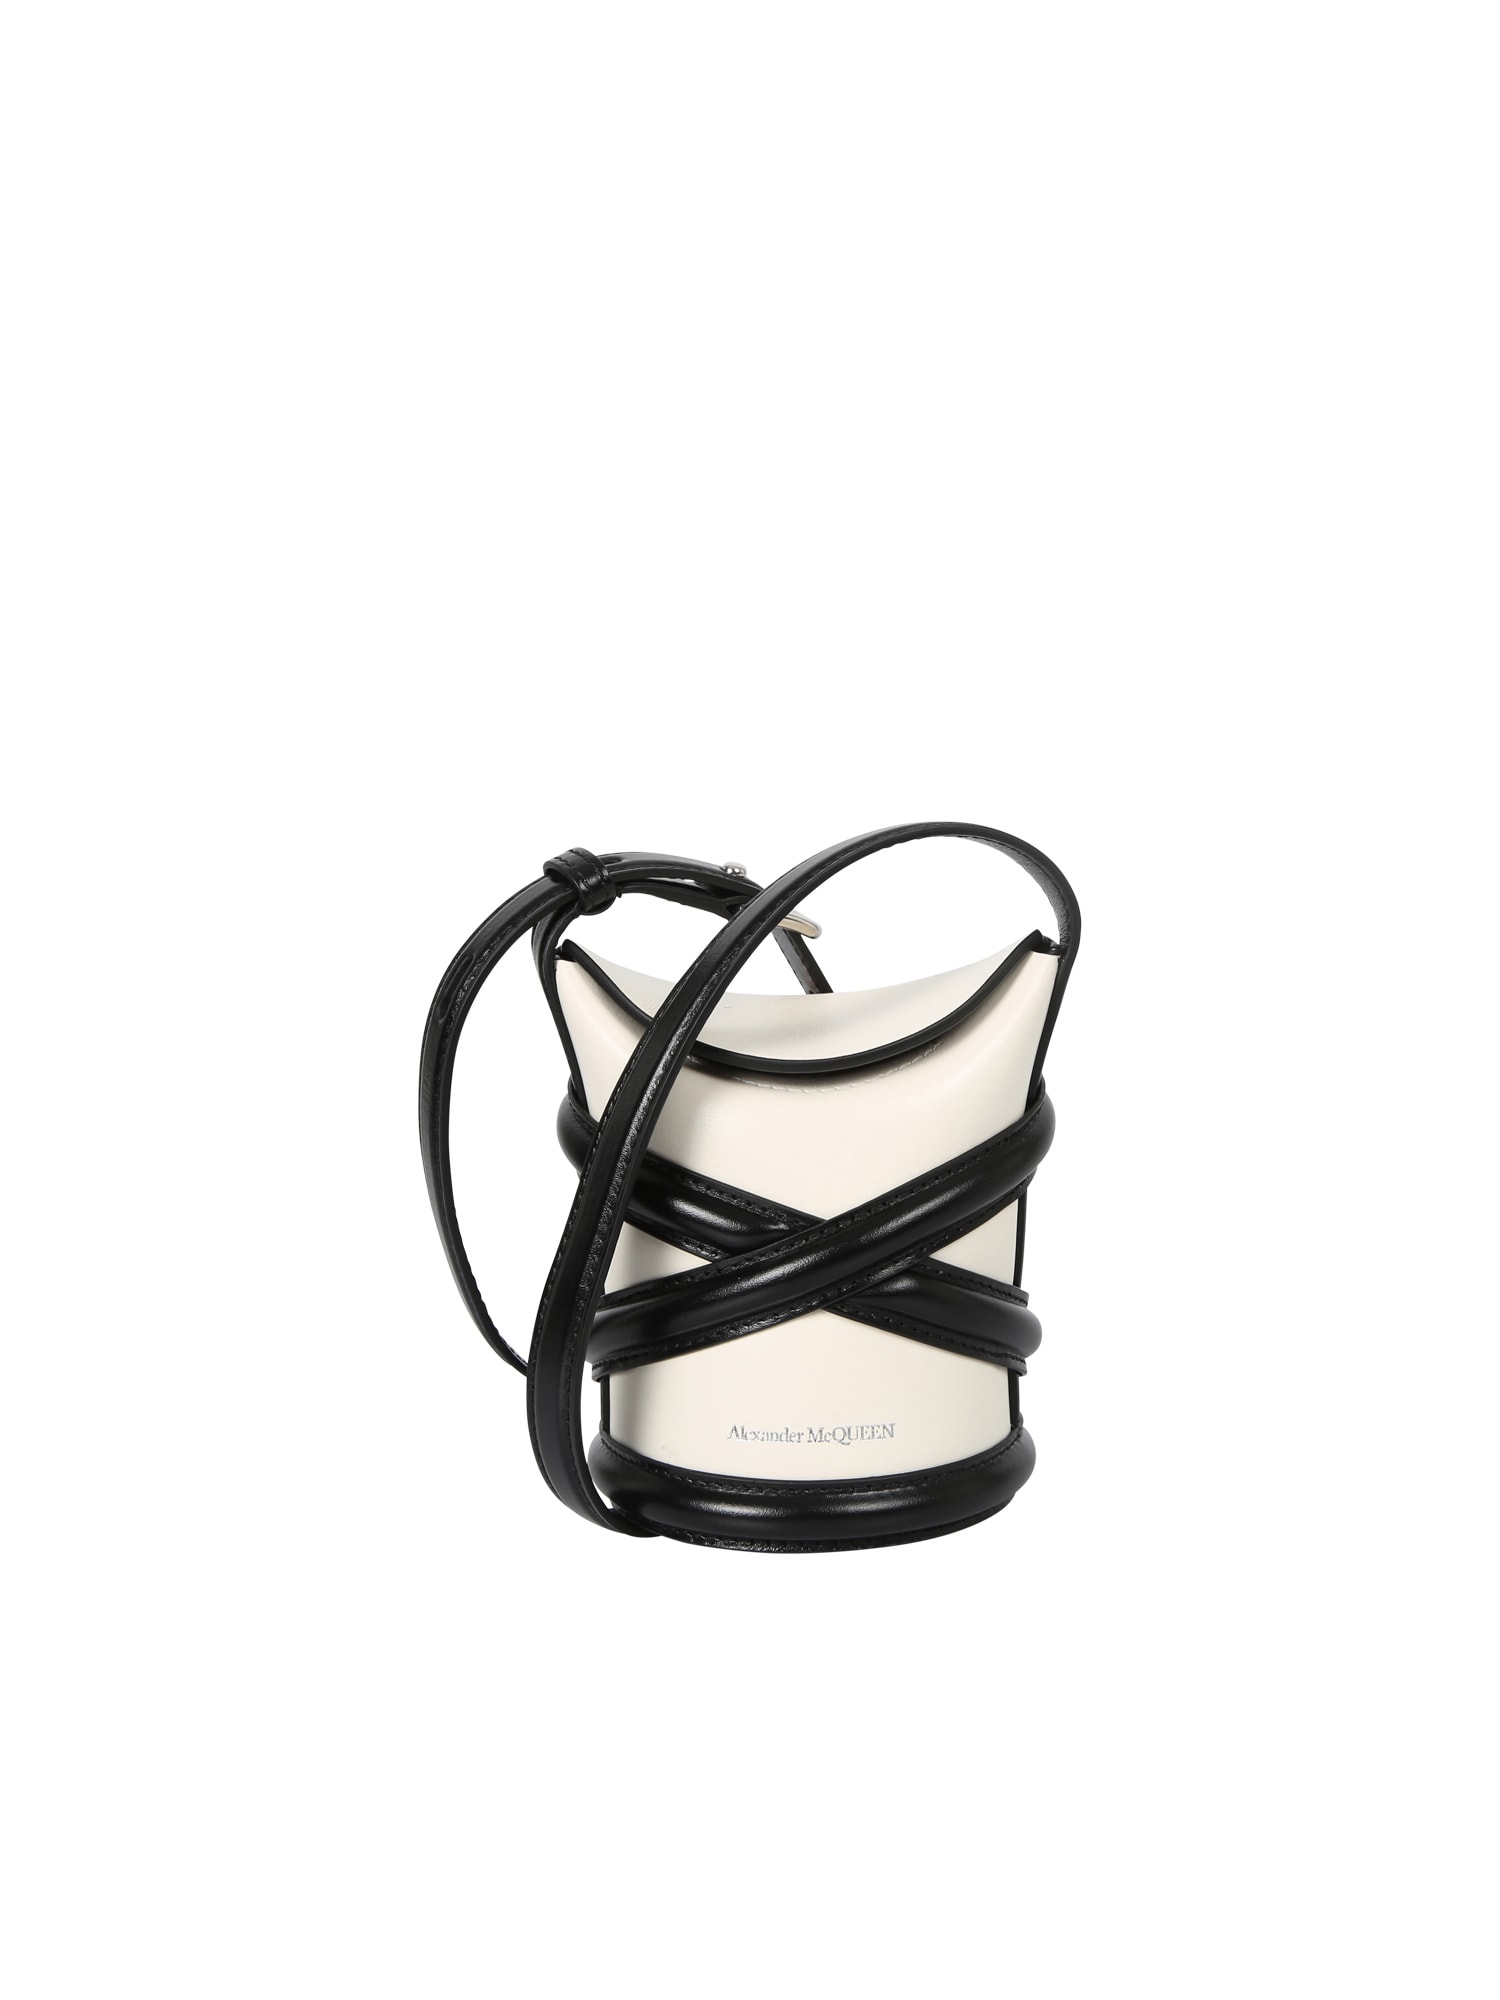 Alexander Mcqueen The Curve Bag In White